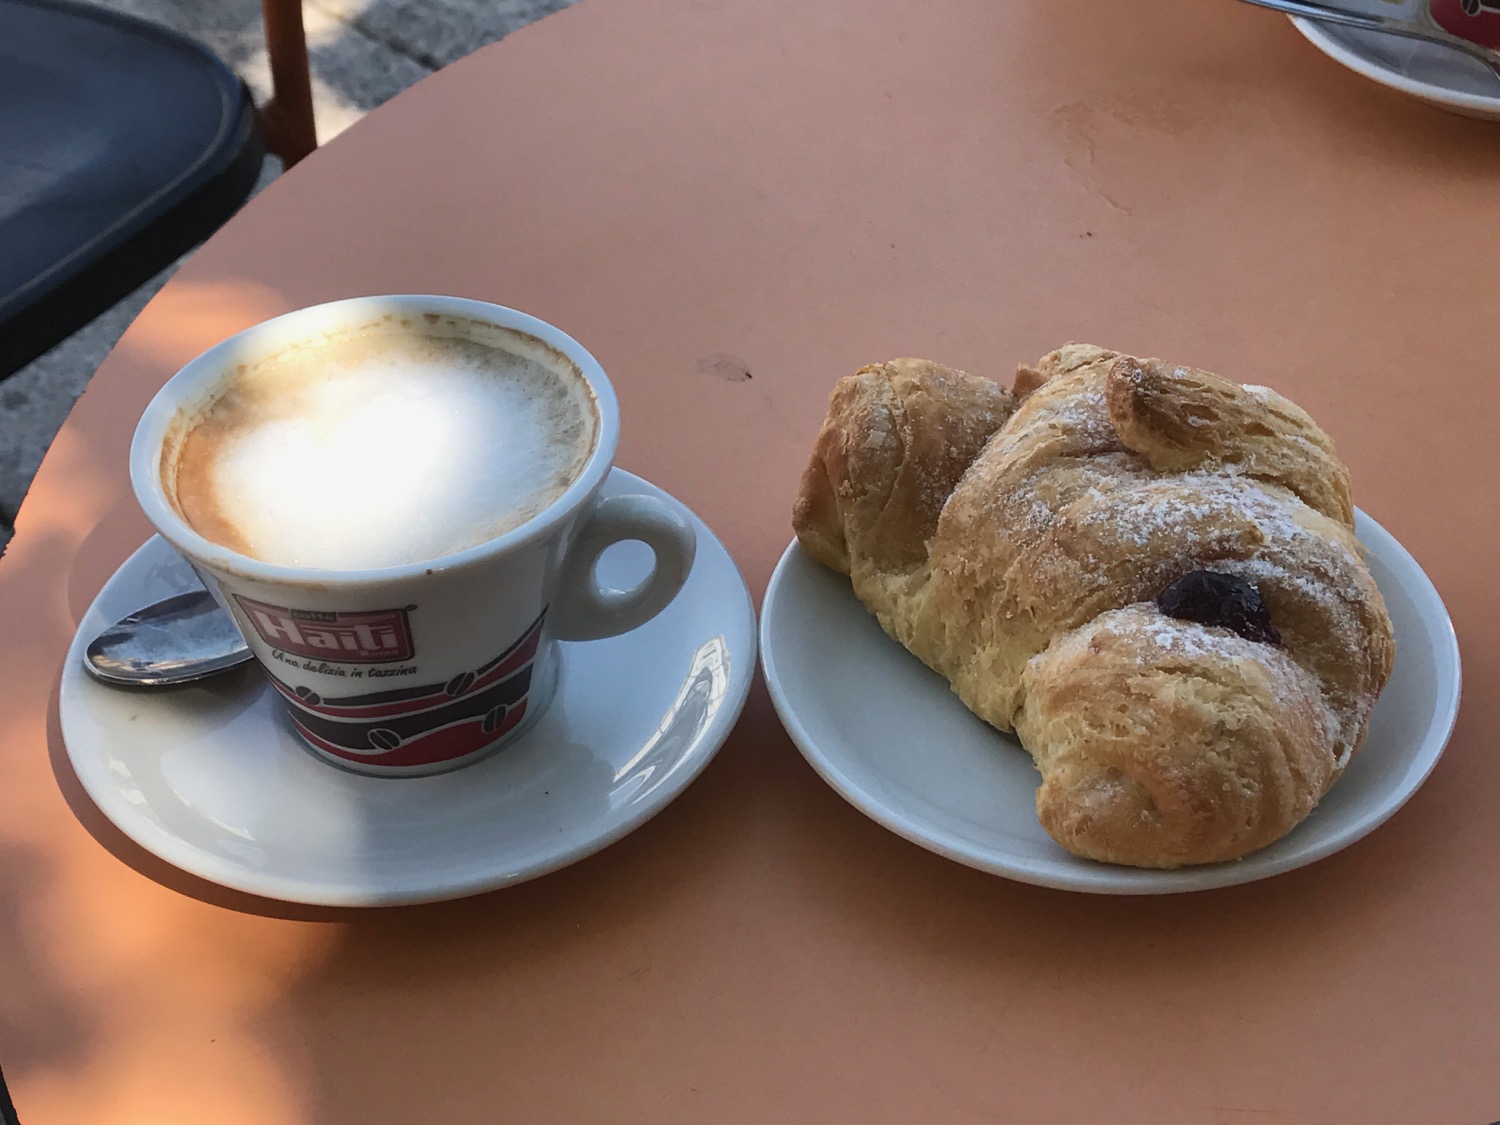 a croissant and a cup of coffee on a table